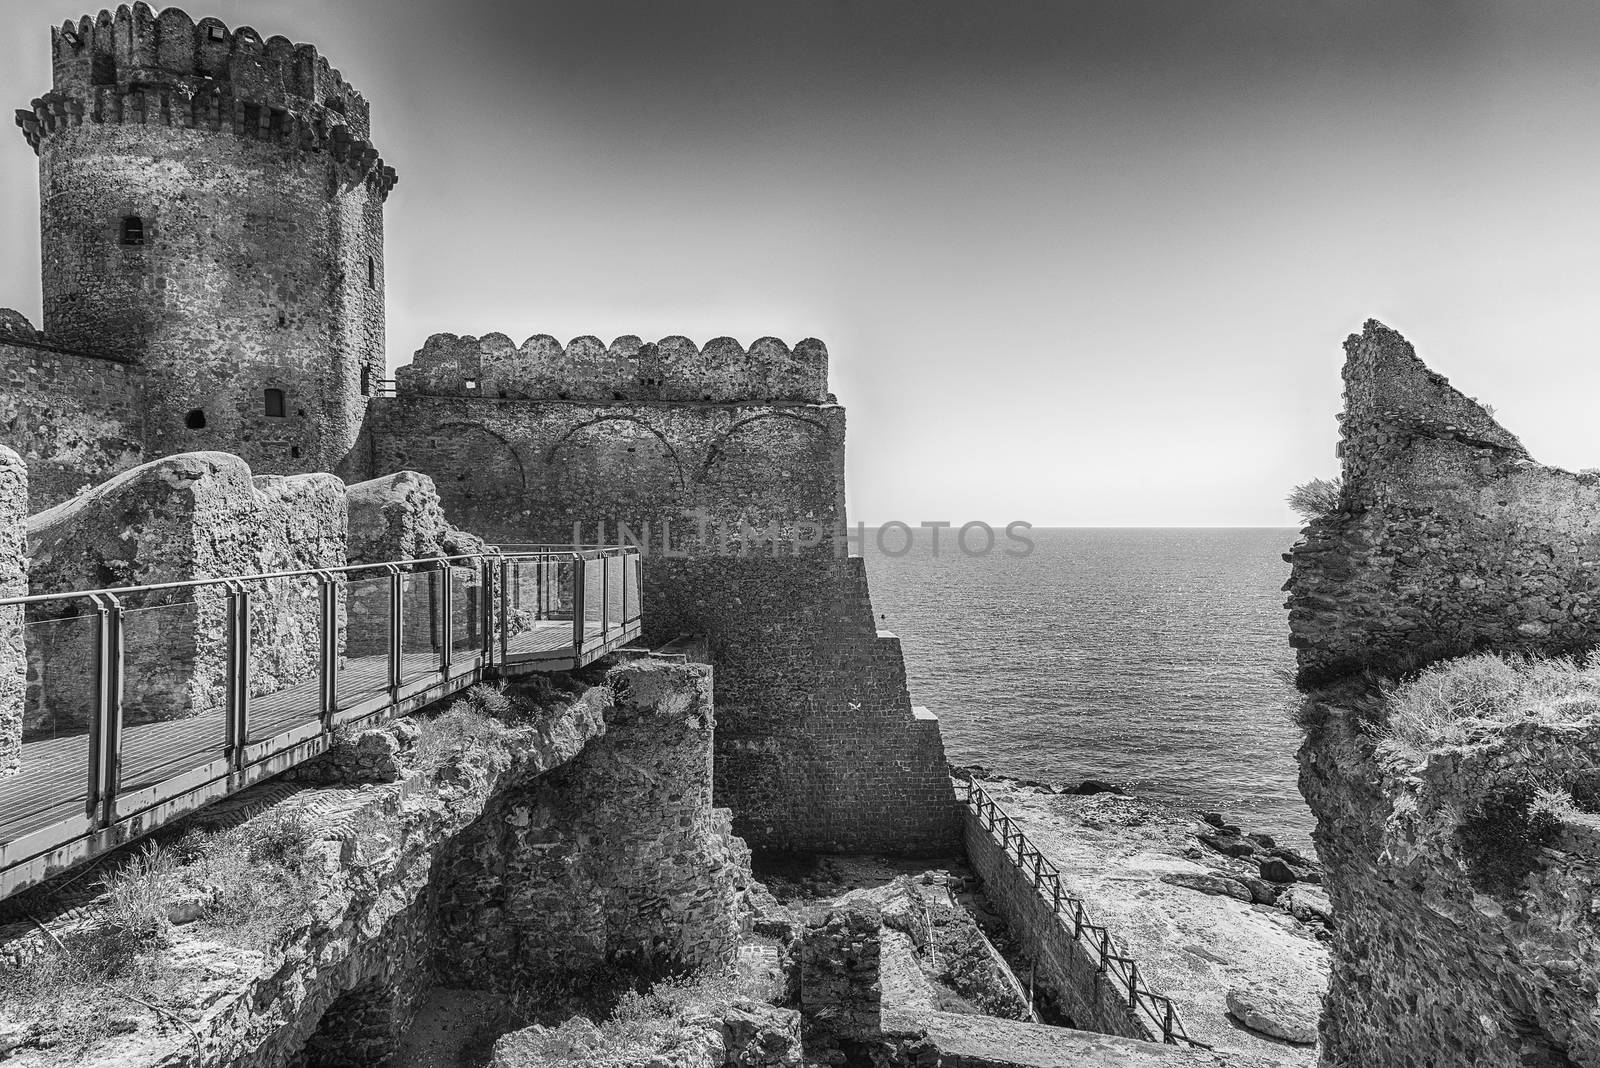 View of the scenic Aragonese Castle, aka Le Castella, on the Ionian Sea in the town of Isola di Capo Rizzuto, Italy